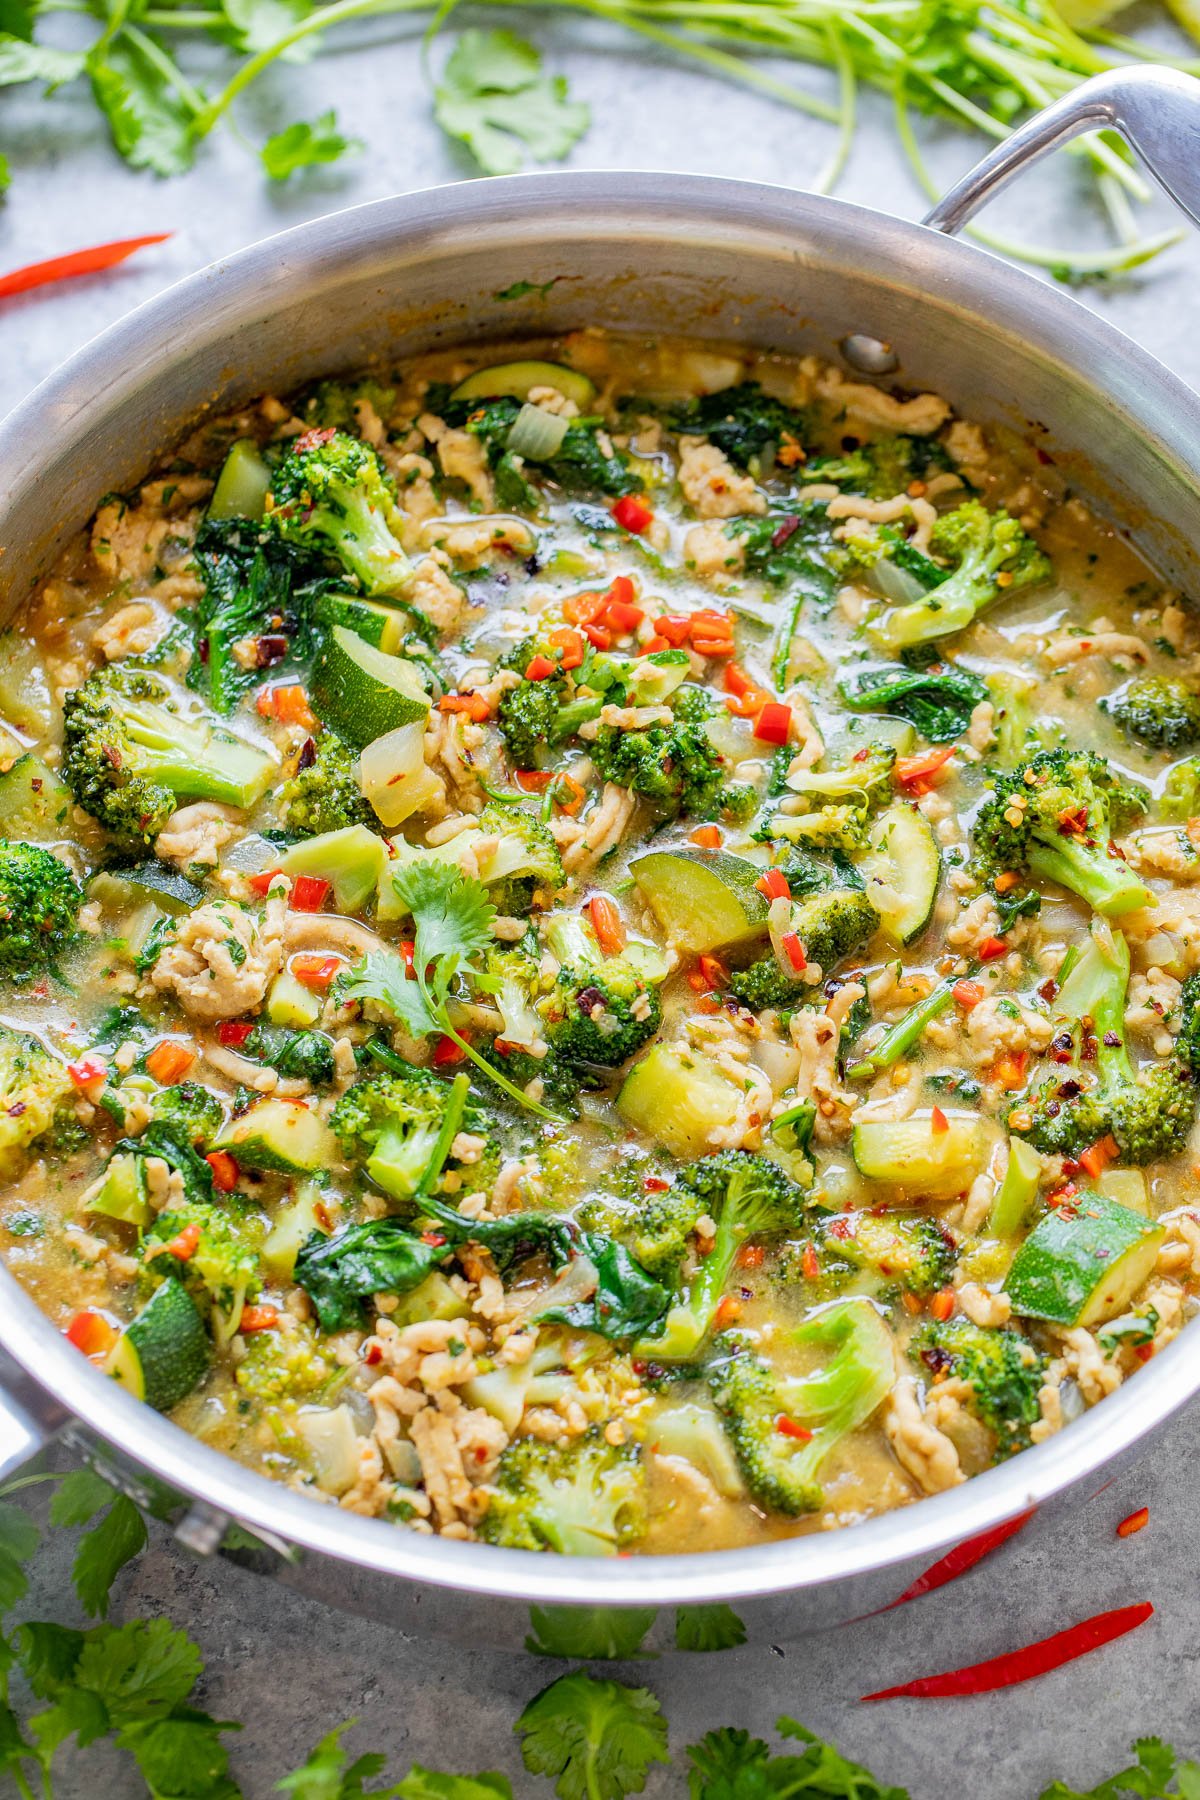 Ground Chicken Green Thai Curry - 💚 Skip takeout and make this EASY, one-skillet green curry with ground chicken and an array of healthy vegetables! Ready in under 30 minutes, great for busy weeknights, and tastes BETTER than from a Thai restaurant! Healthy yet hearty comfort food that tastes AMAZING and is naturally gluten-free.